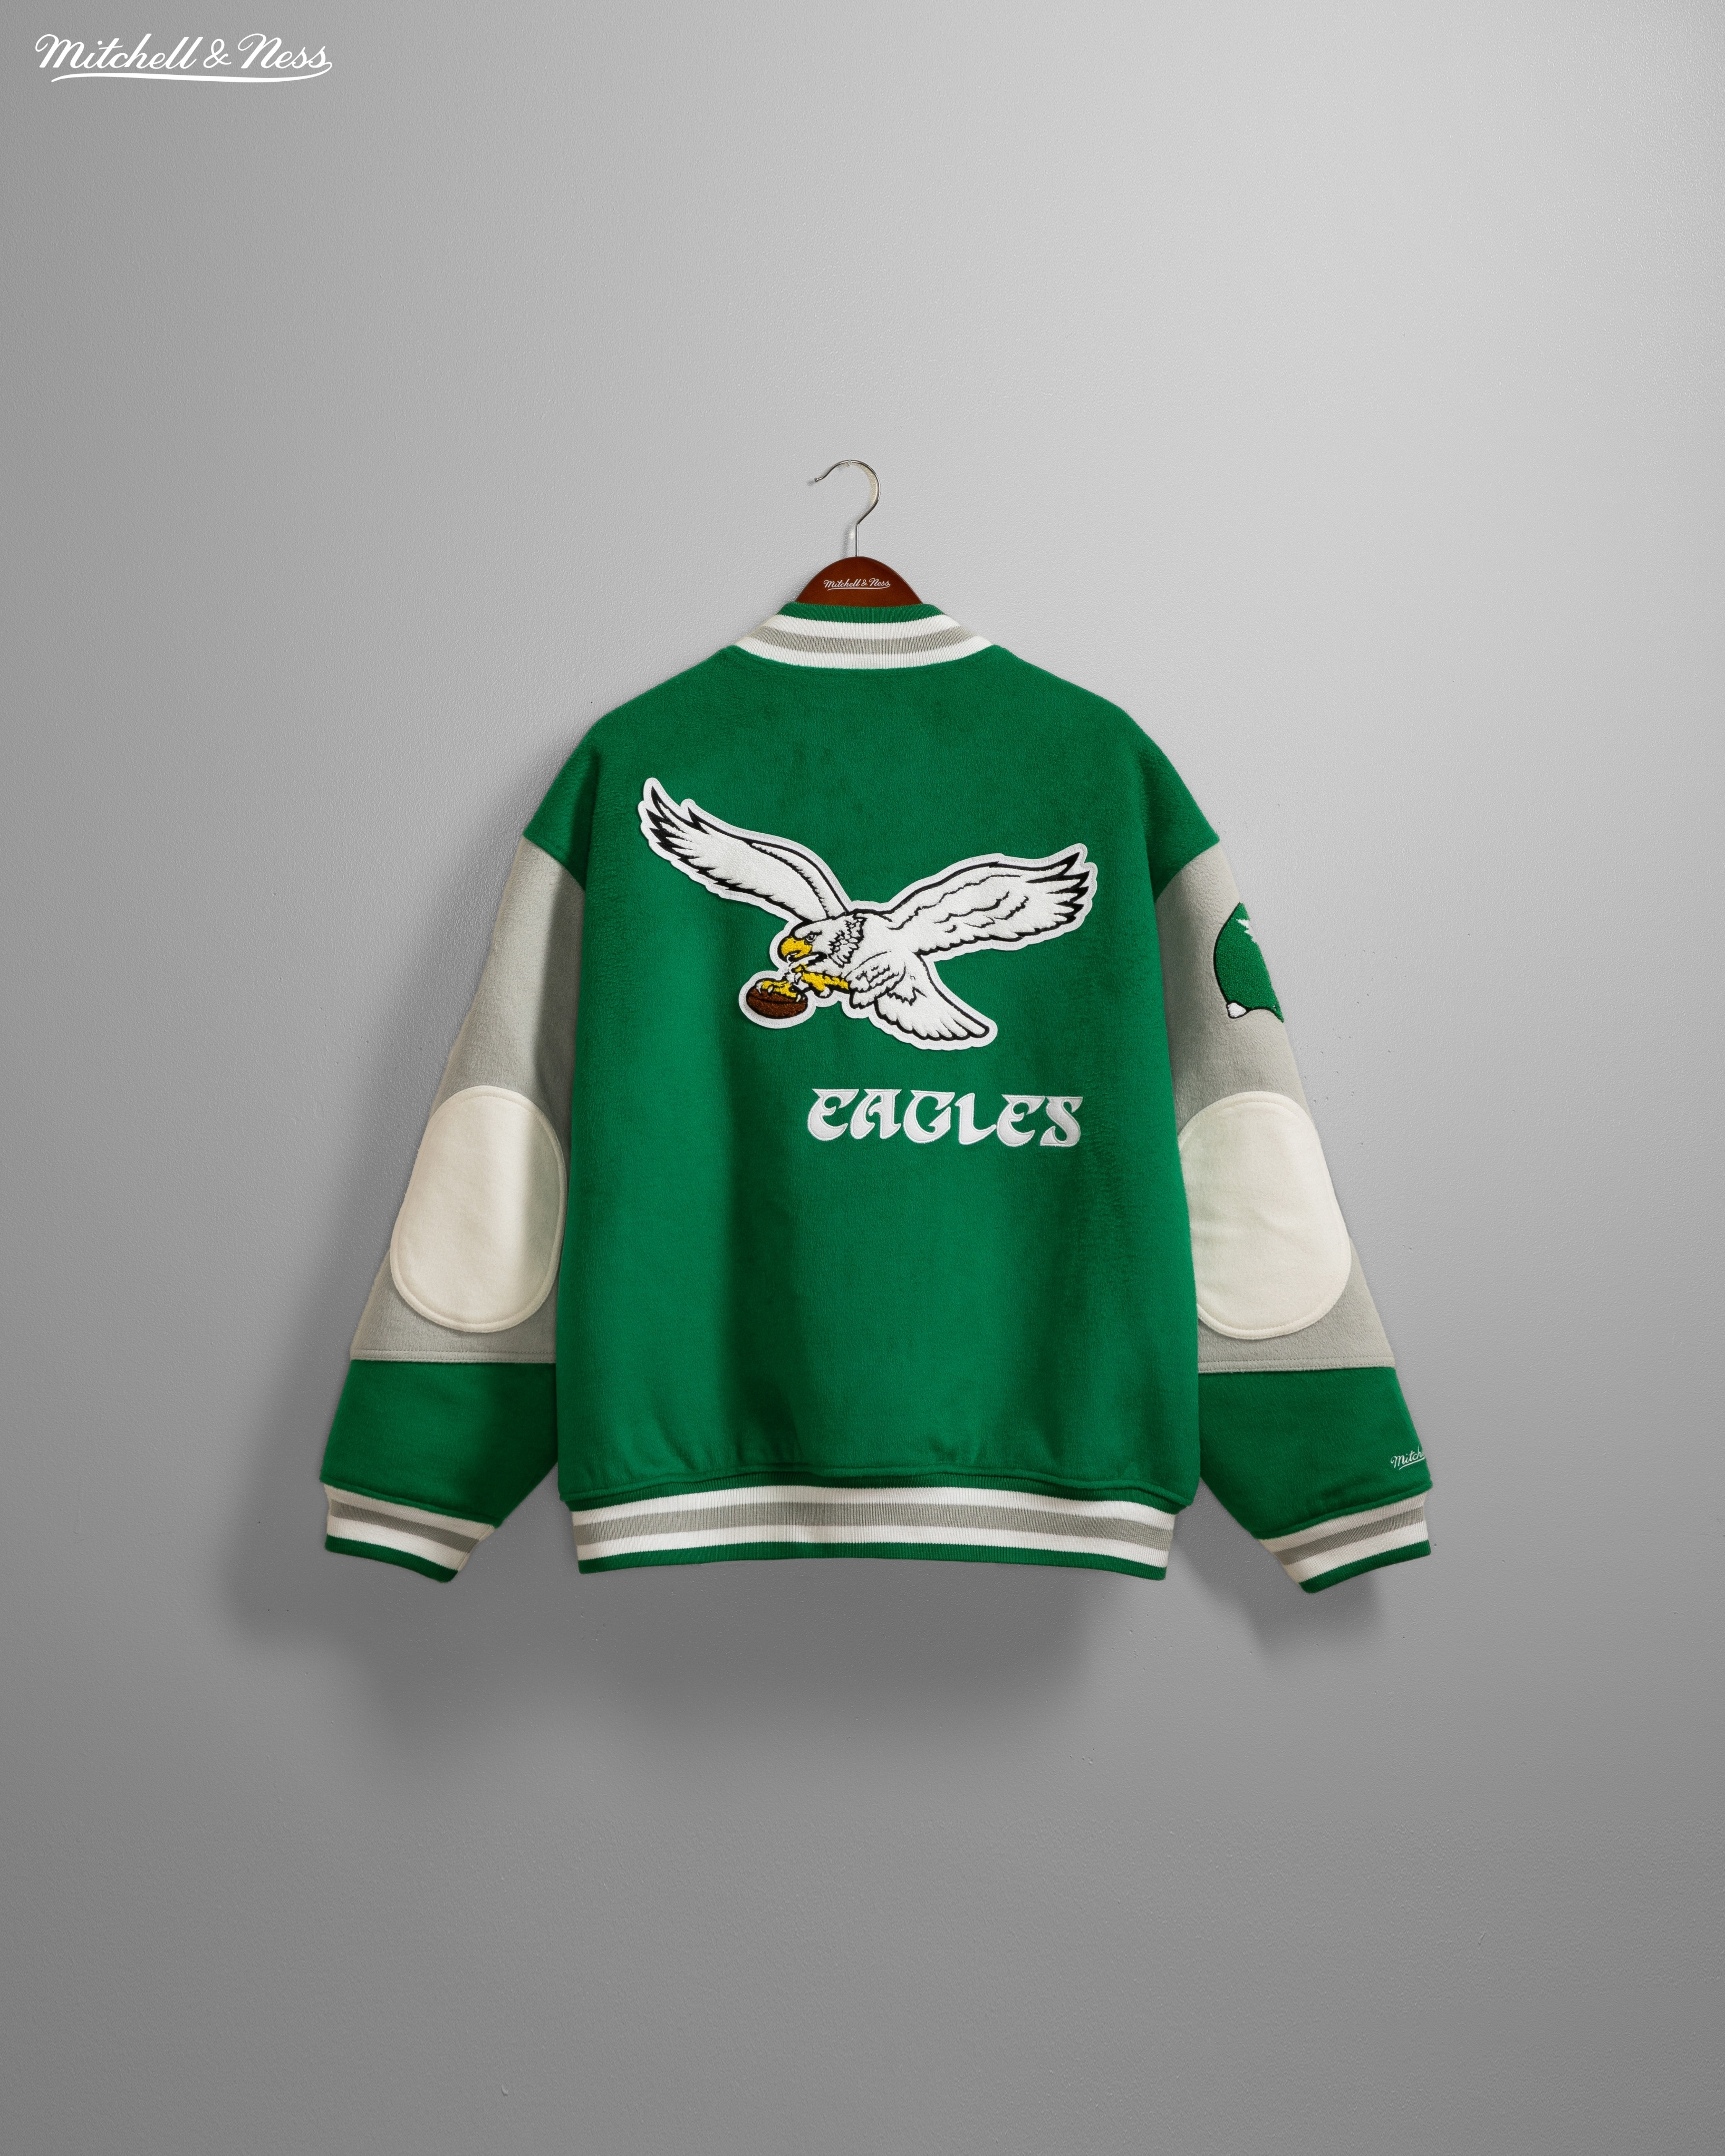 eagles jacket is pictured